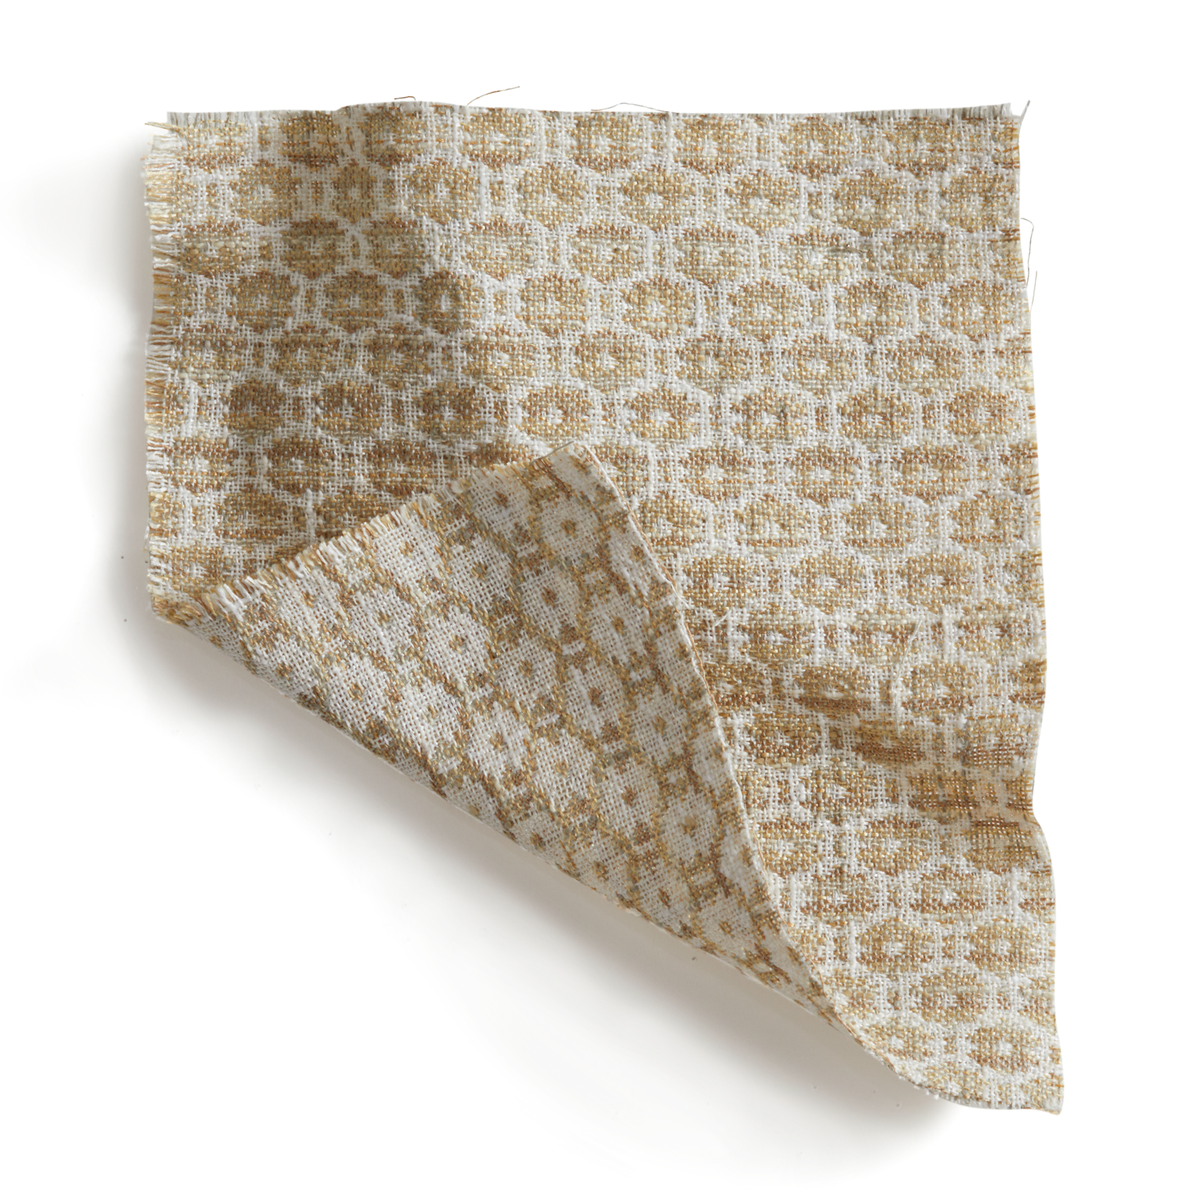 Floret Fabric in Wheat